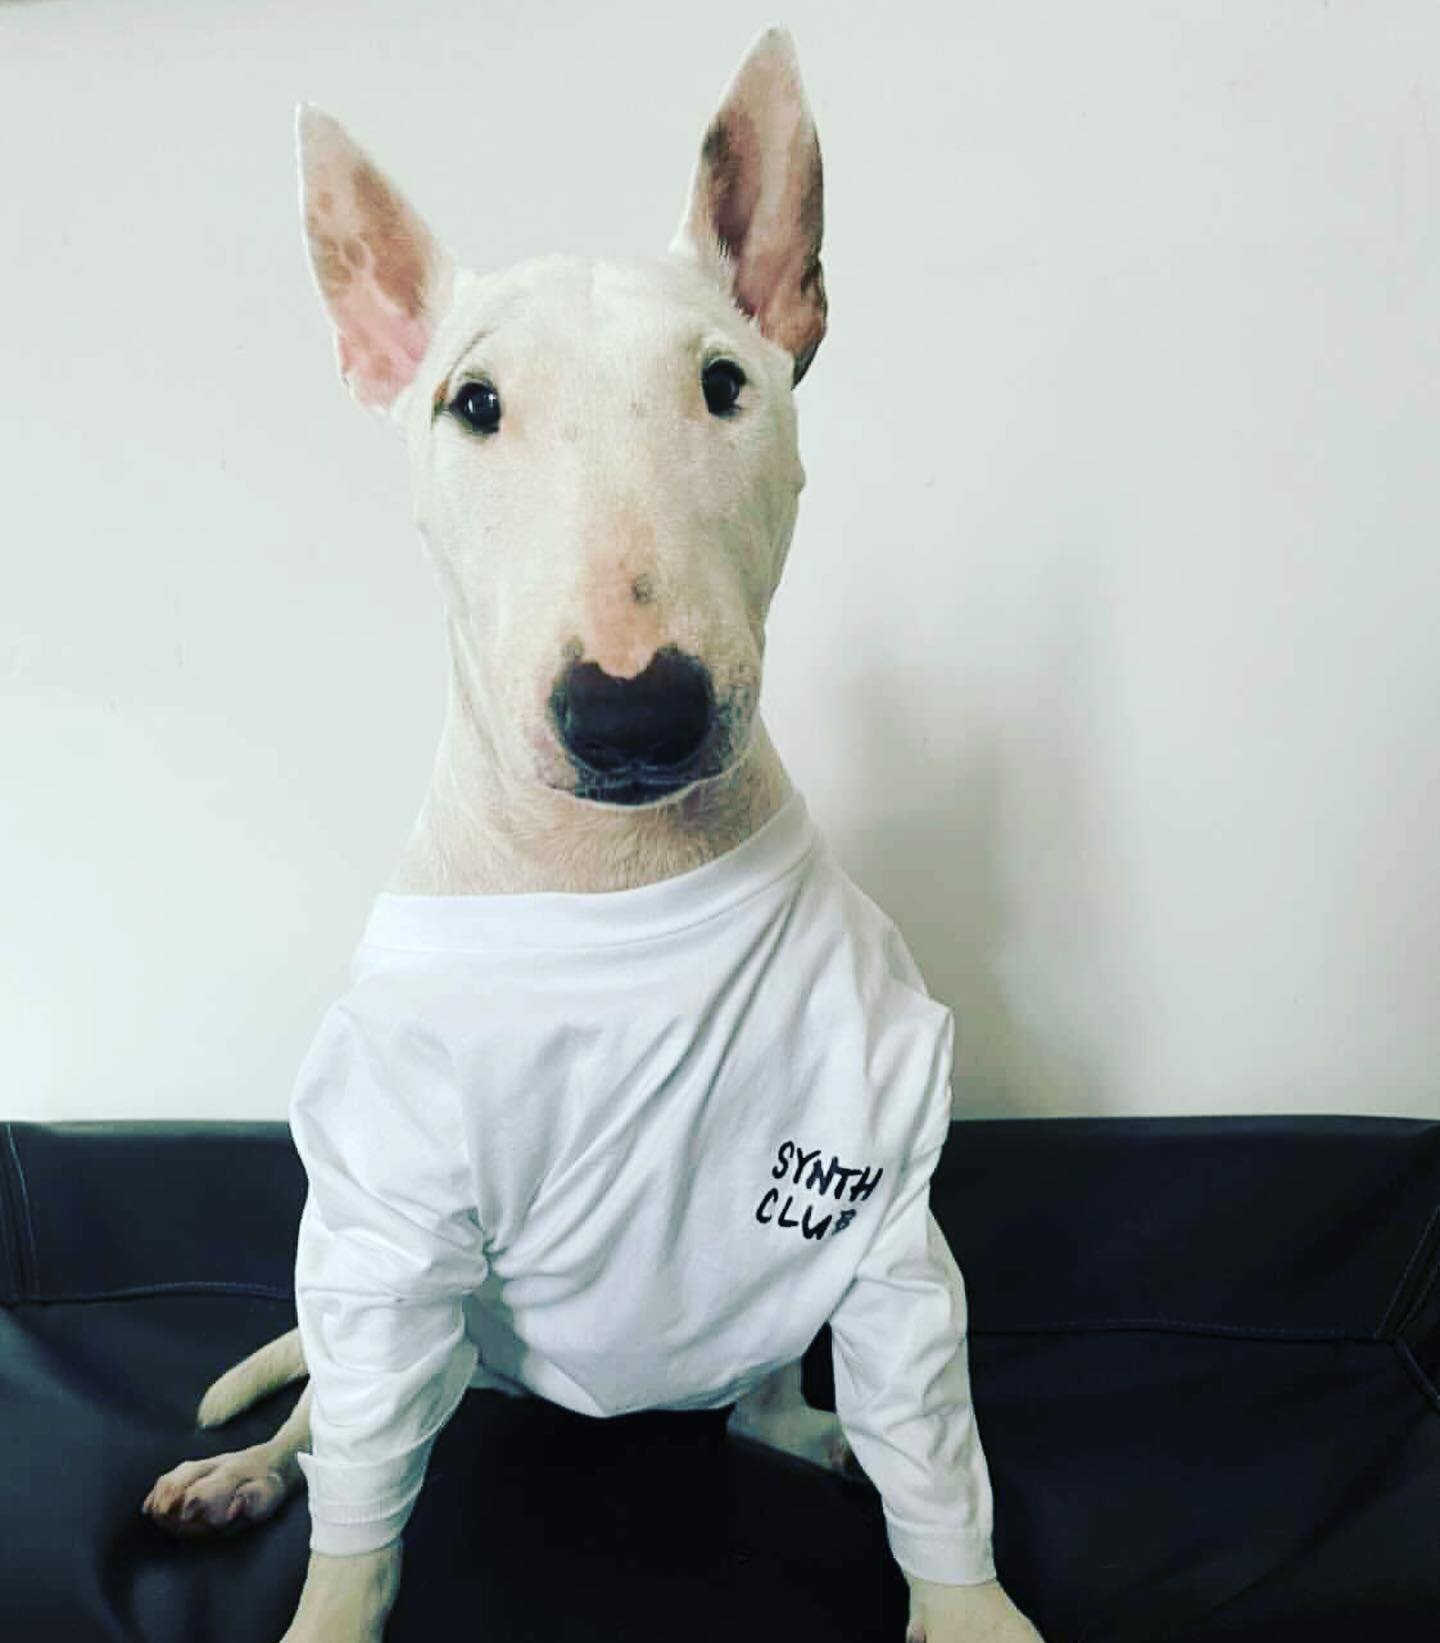 OMG
-
Loki strikes back in her Synth Club T shirt.
-
Available in human sizes on the Rex store. Link in the usual place!
-
#bullterrier